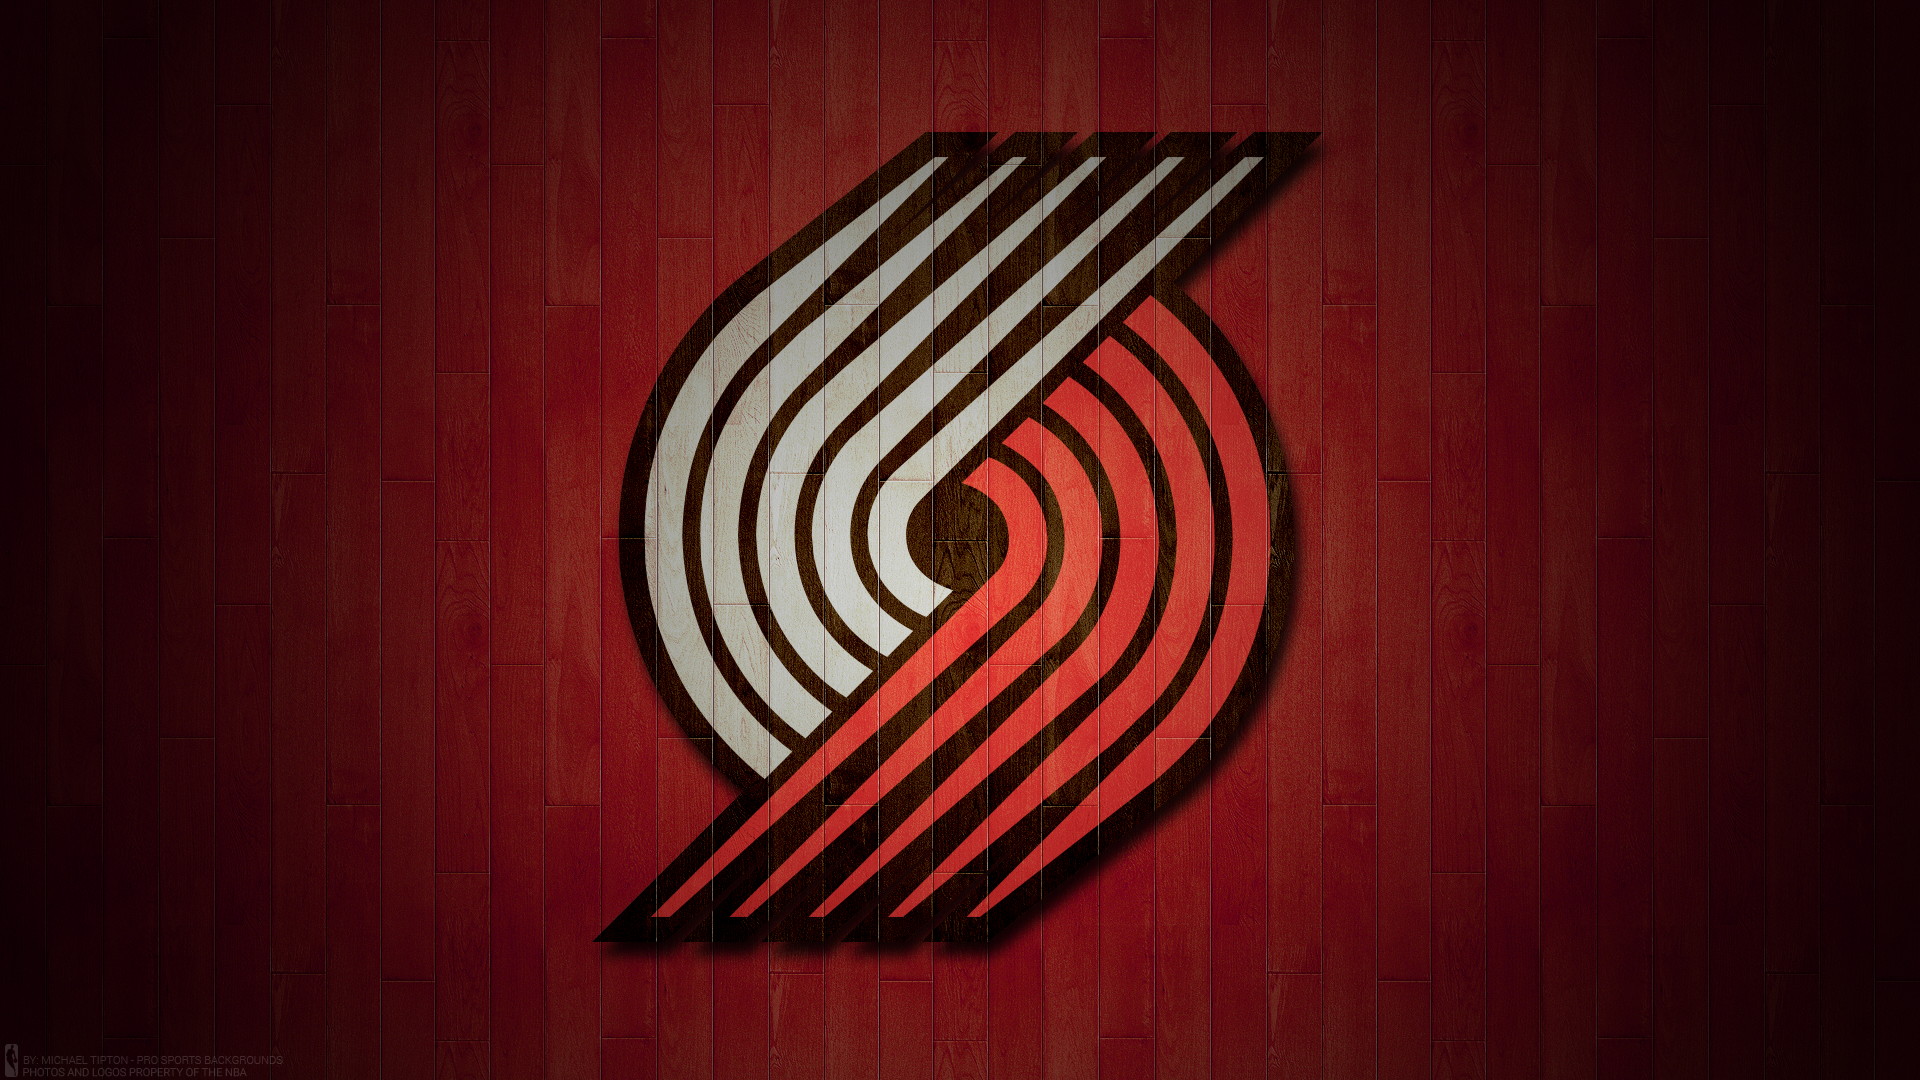 HD Desktop Wallpaper Portland Trail Blazers with high-resolution 1920x1080 pixel. You can use this wallpaper for your Desktop Computer Backgrounds, Windows or Mac Screensavers, iPhone Lock screen, Tablet or Android and another Mobile Phone device